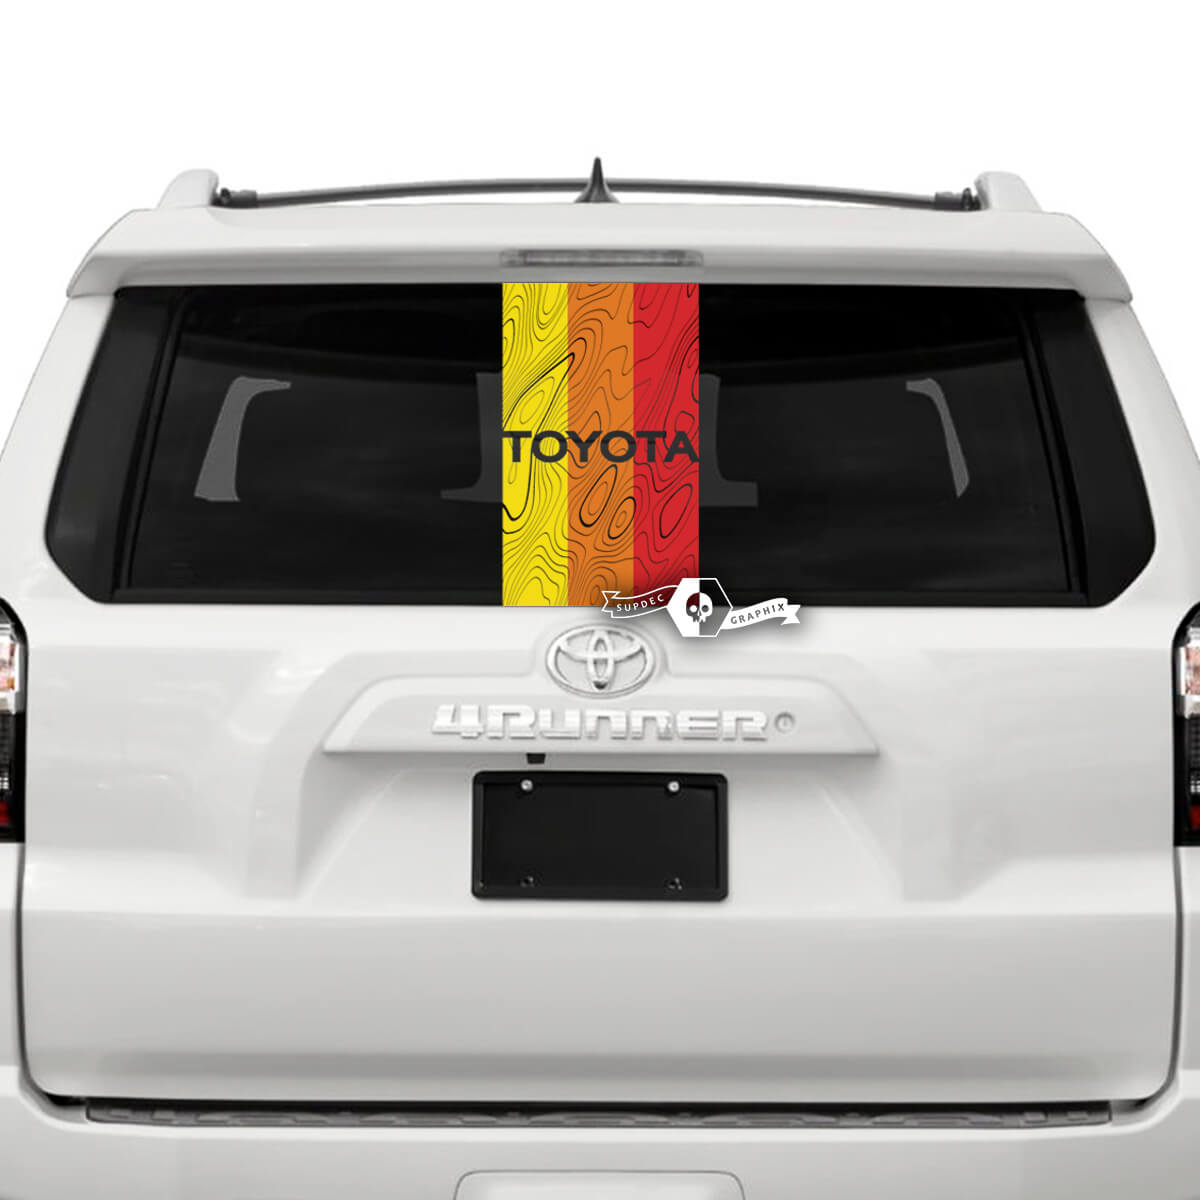 Toyota Windshield Rear Window SunSet TriColor Vinyl Logo Decals Stickers for Toyo
